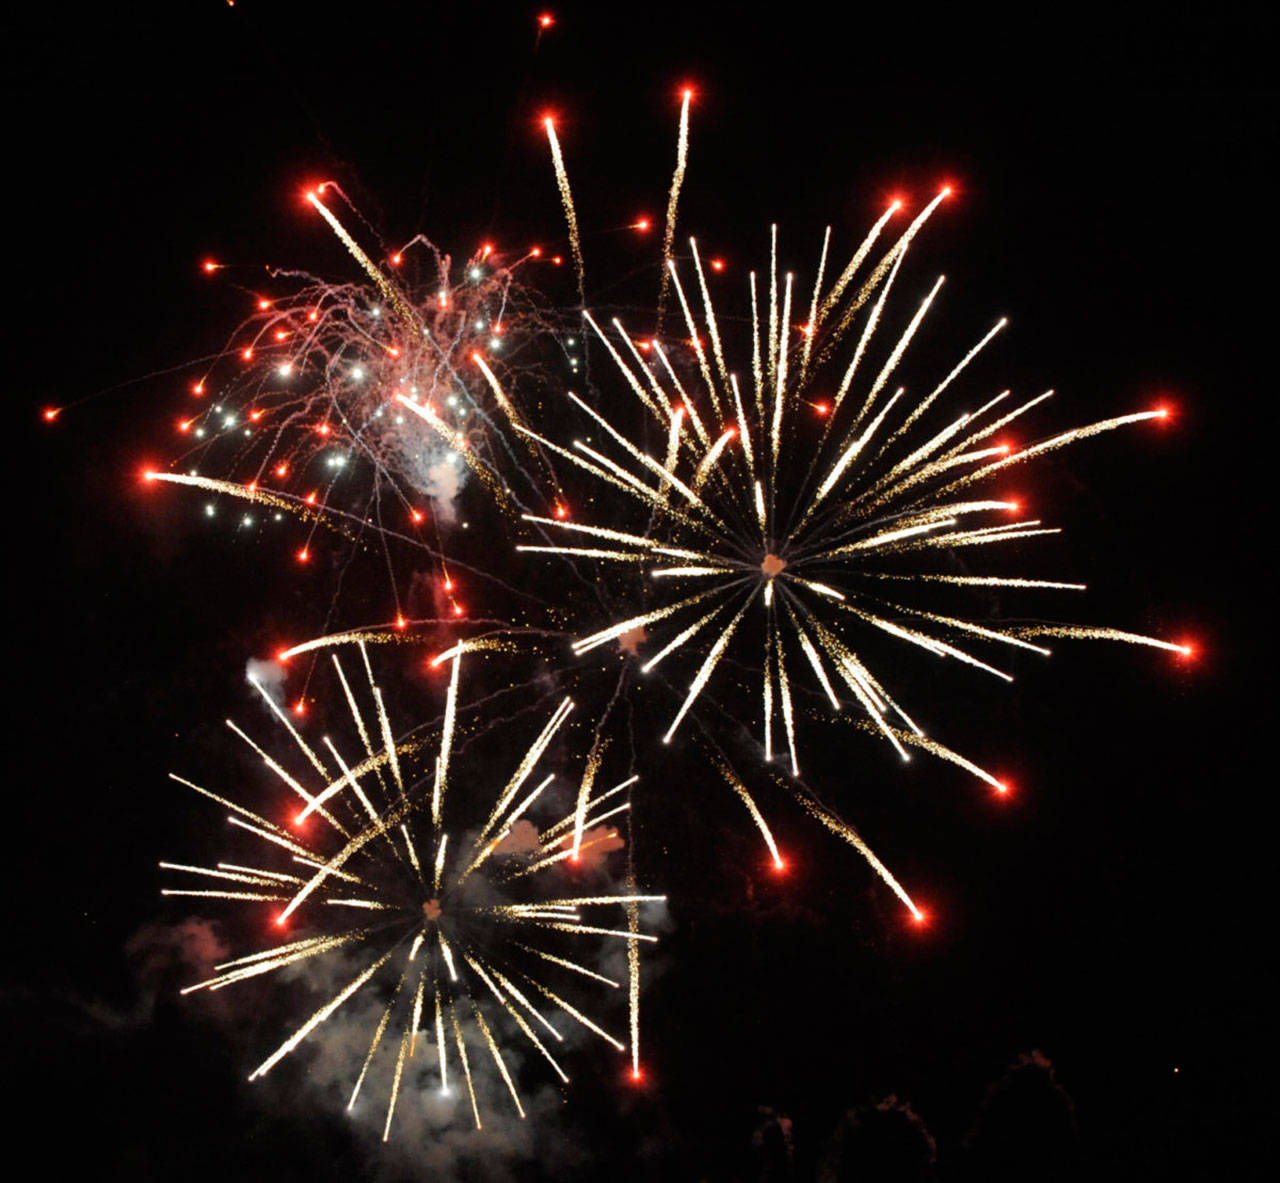 City of Sequim staff will begin negotiations to bring a fireworks show to Carrie Blake Community Park on Independence Day. In non-pandemic years, Sequim hosts fireworks each May for the Sequim Irrigation Festival Logging Show, as seen here in 2018. (Michael Dashiell /Olympic Peninsula News Group)